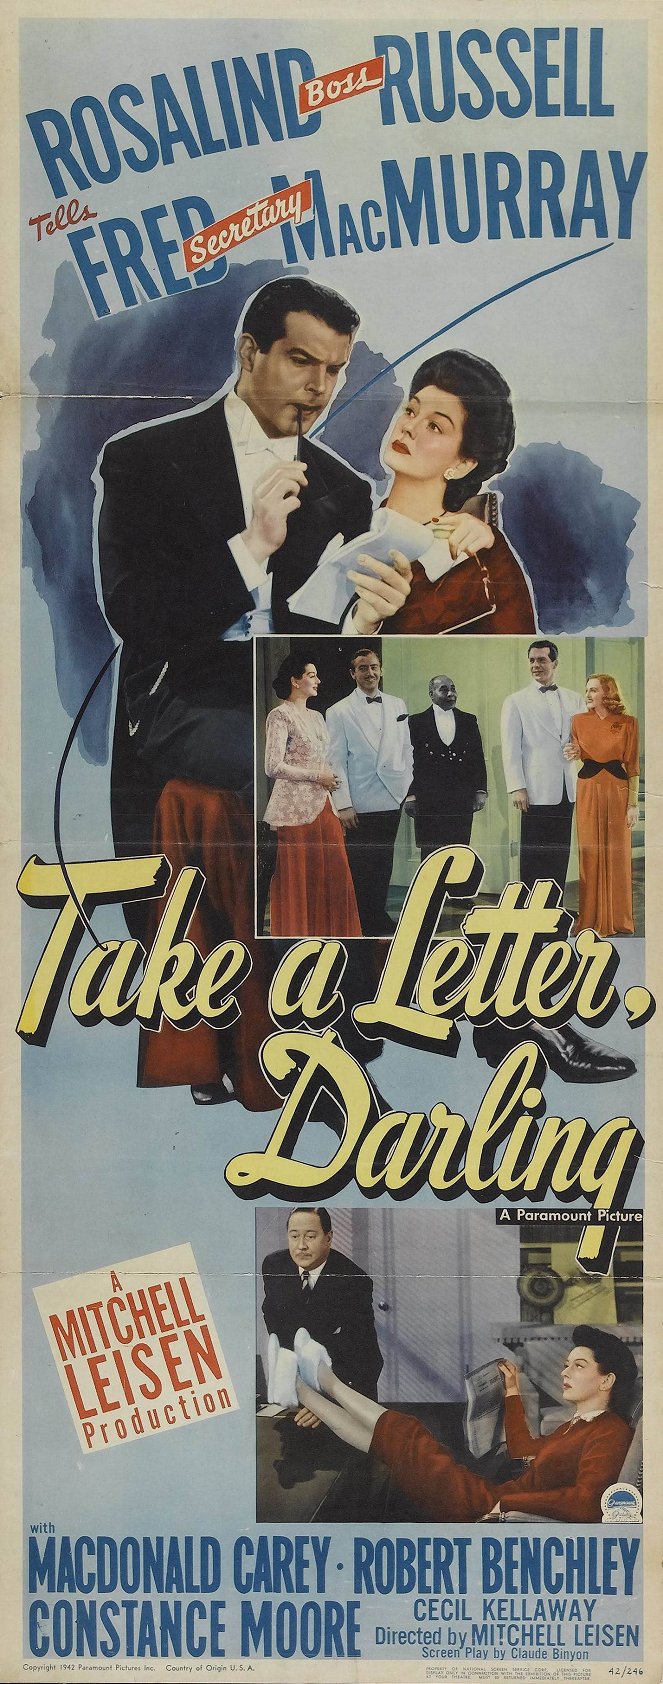 Take a Letter, Darling - Posters